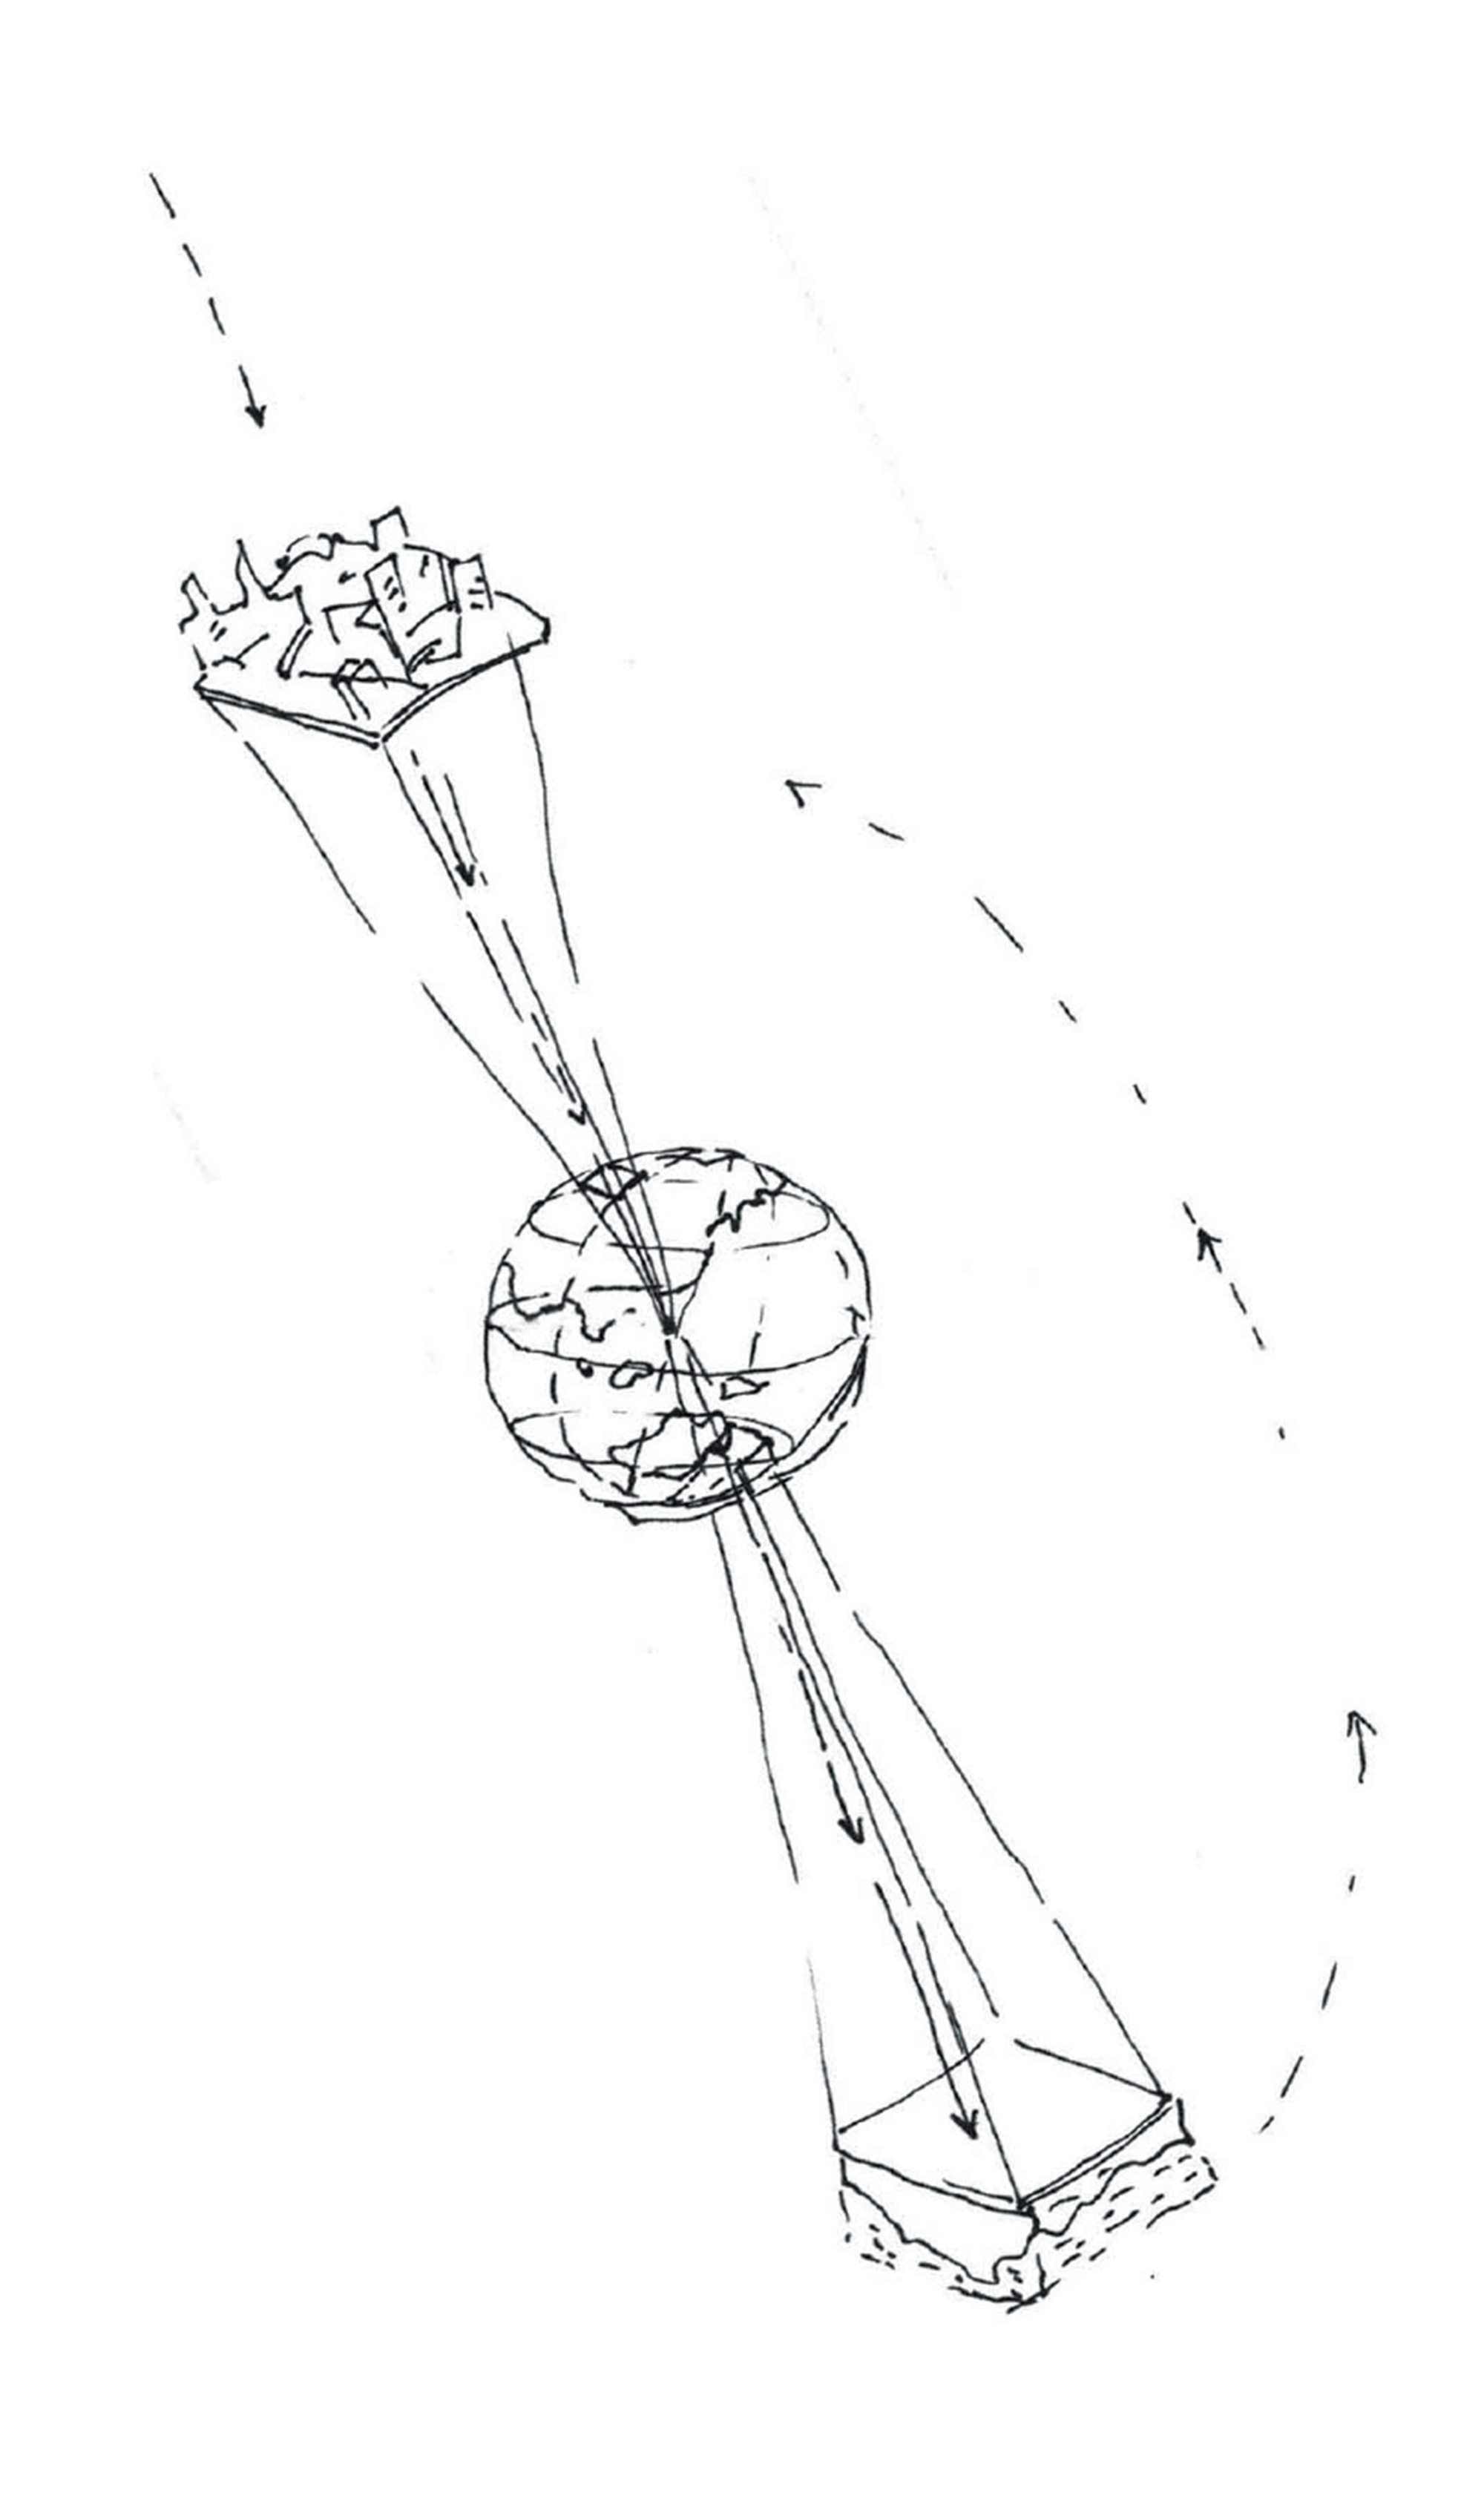 A sketch by artist Vadim Fishkin of the earth showing two sections on opposite sides pulled out and magnified.